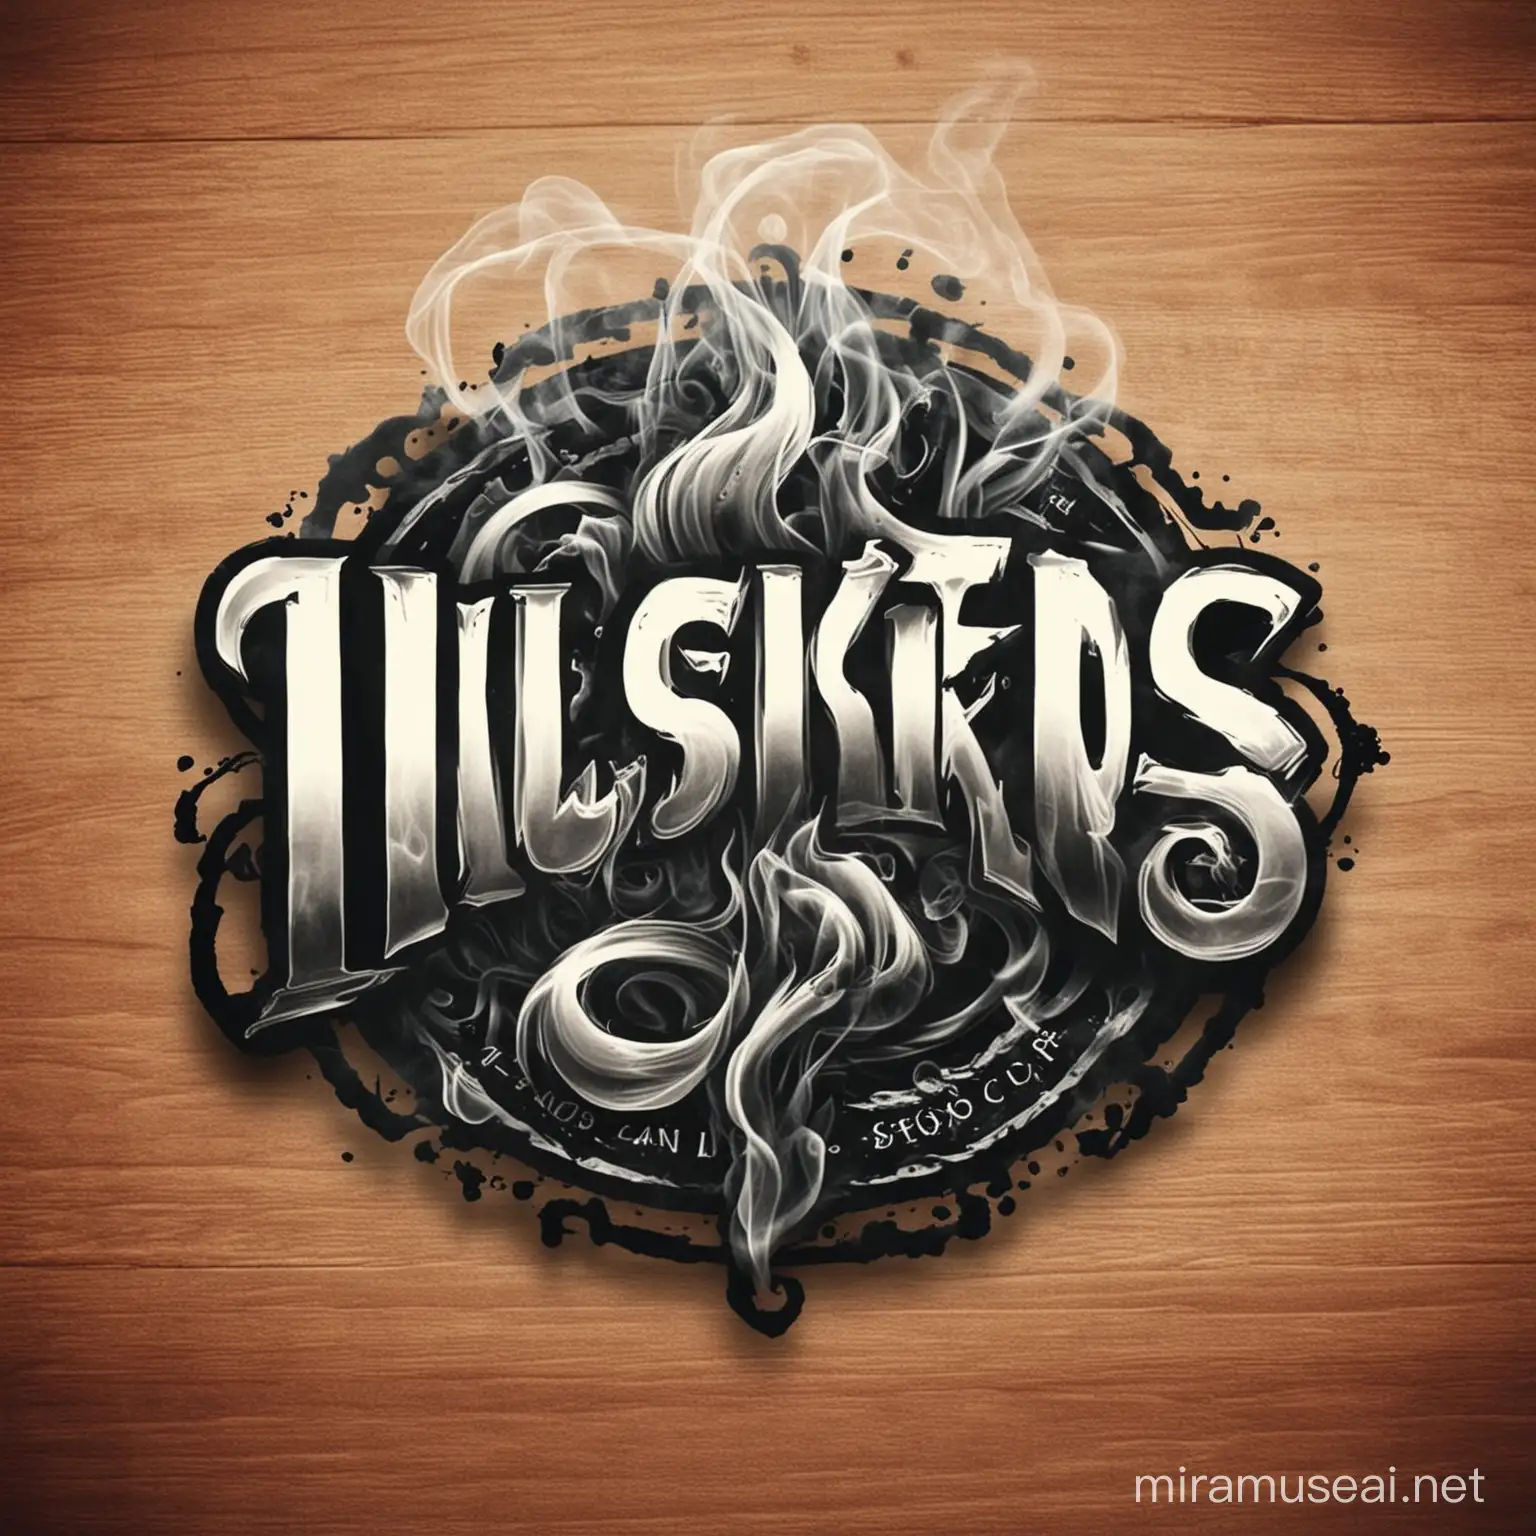 Illusions Smoke Shop Logo Intriguing Design Featuring Name Incorporation